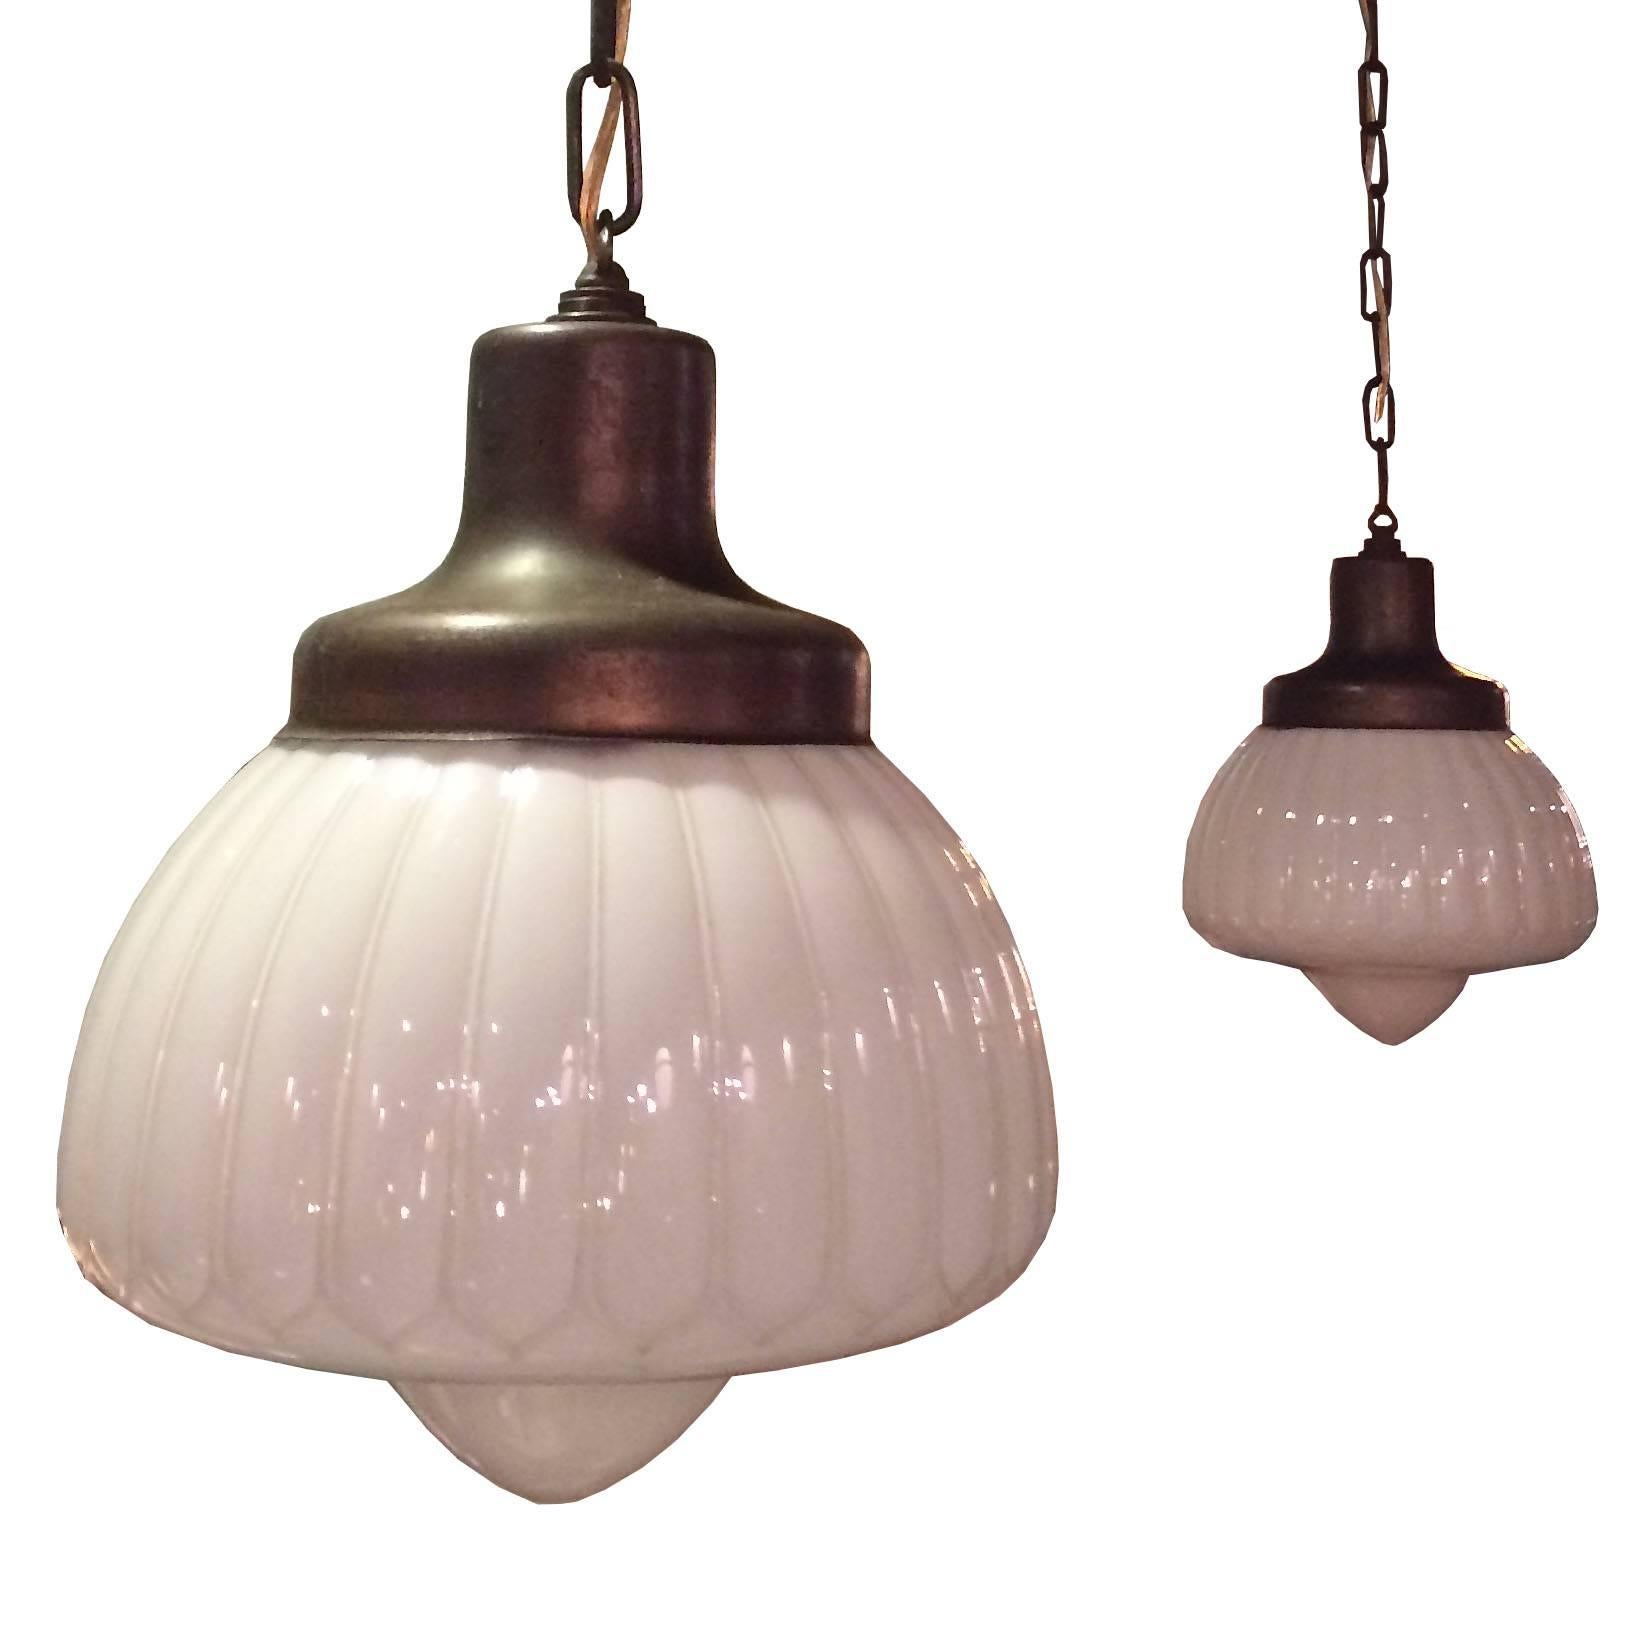 Set of 3 fancy, fluted milk glass library / pharmacy pendant lights with matching copper plated fitters, chains and canopies.